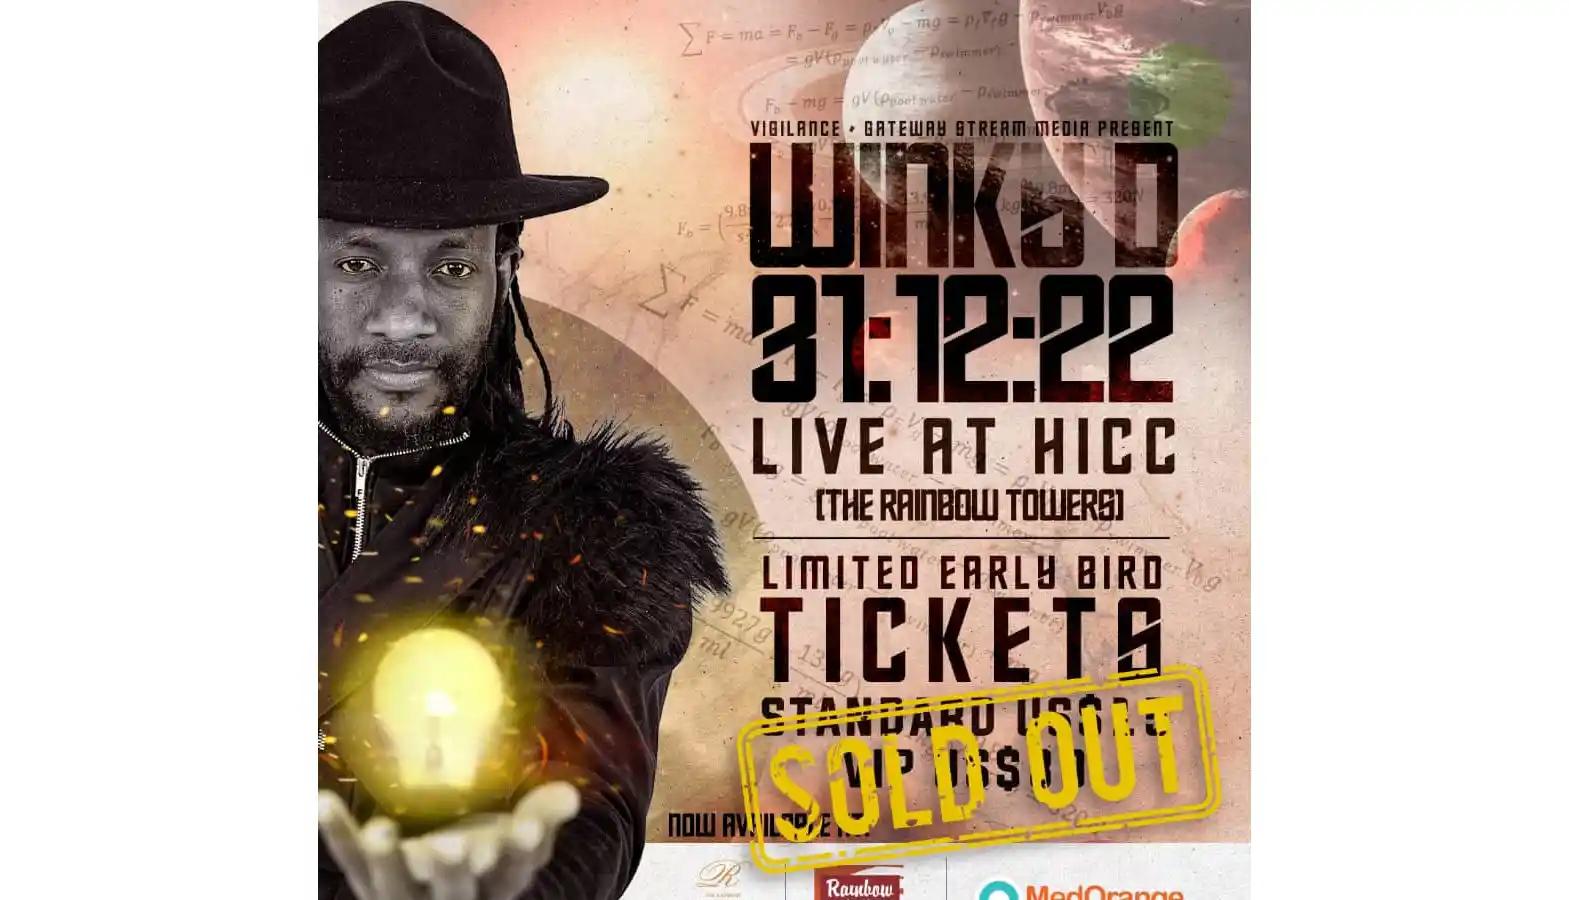 Early bird tickets for Winky D show which were selling for US$15 for general entry and US$30 for VIP sold out last week.